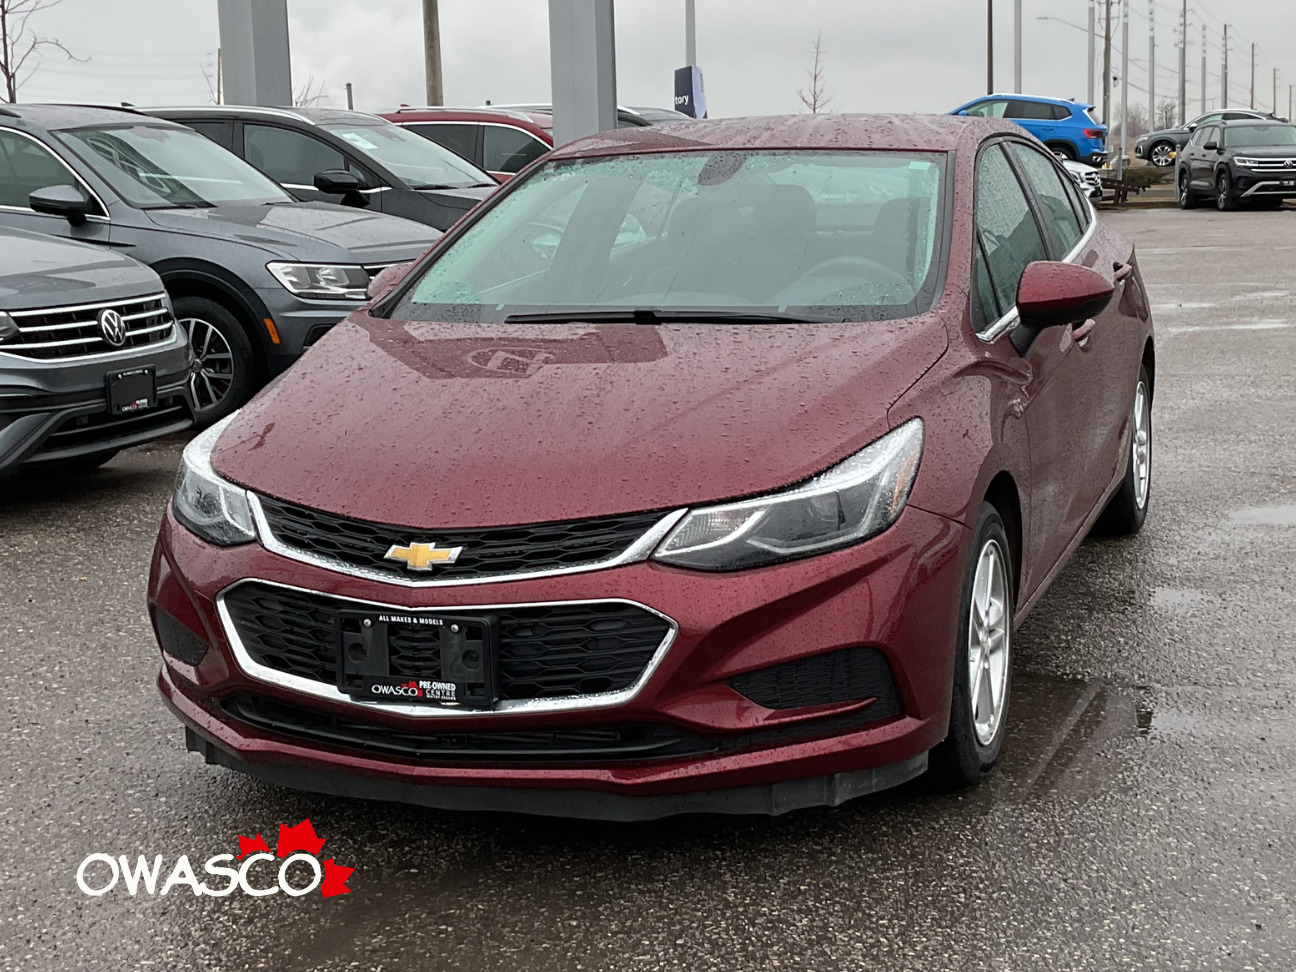 2016 Chevrolet Cruze 1.4L Low KMs! Safety Included!